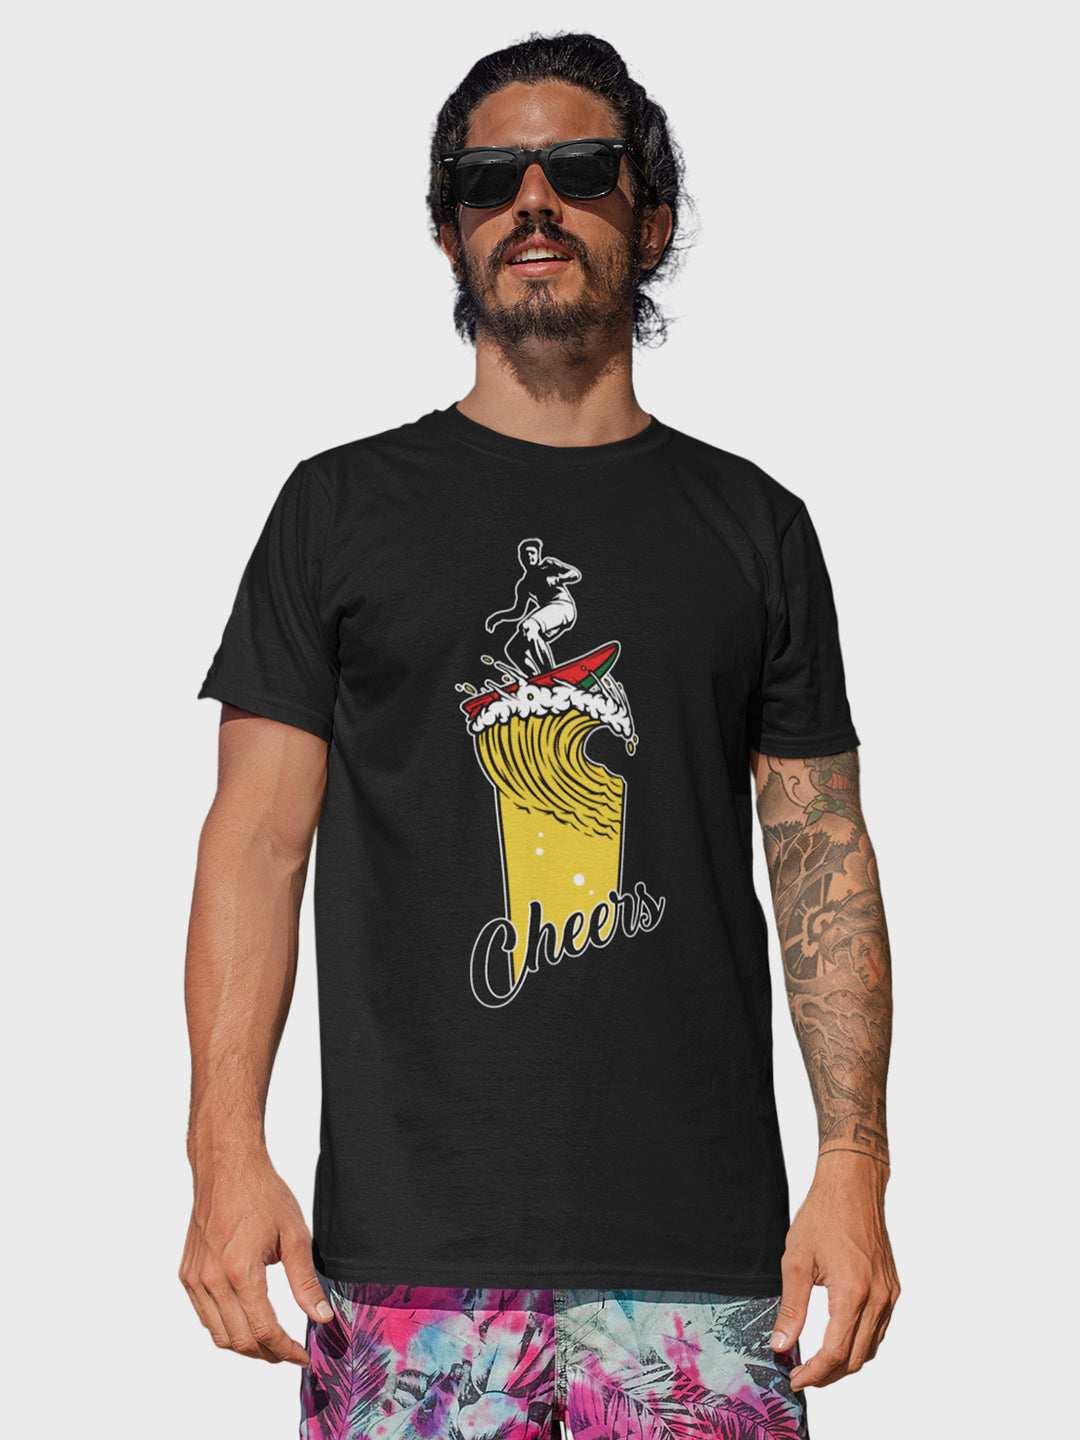 The Surfing Cheers T-Shirt